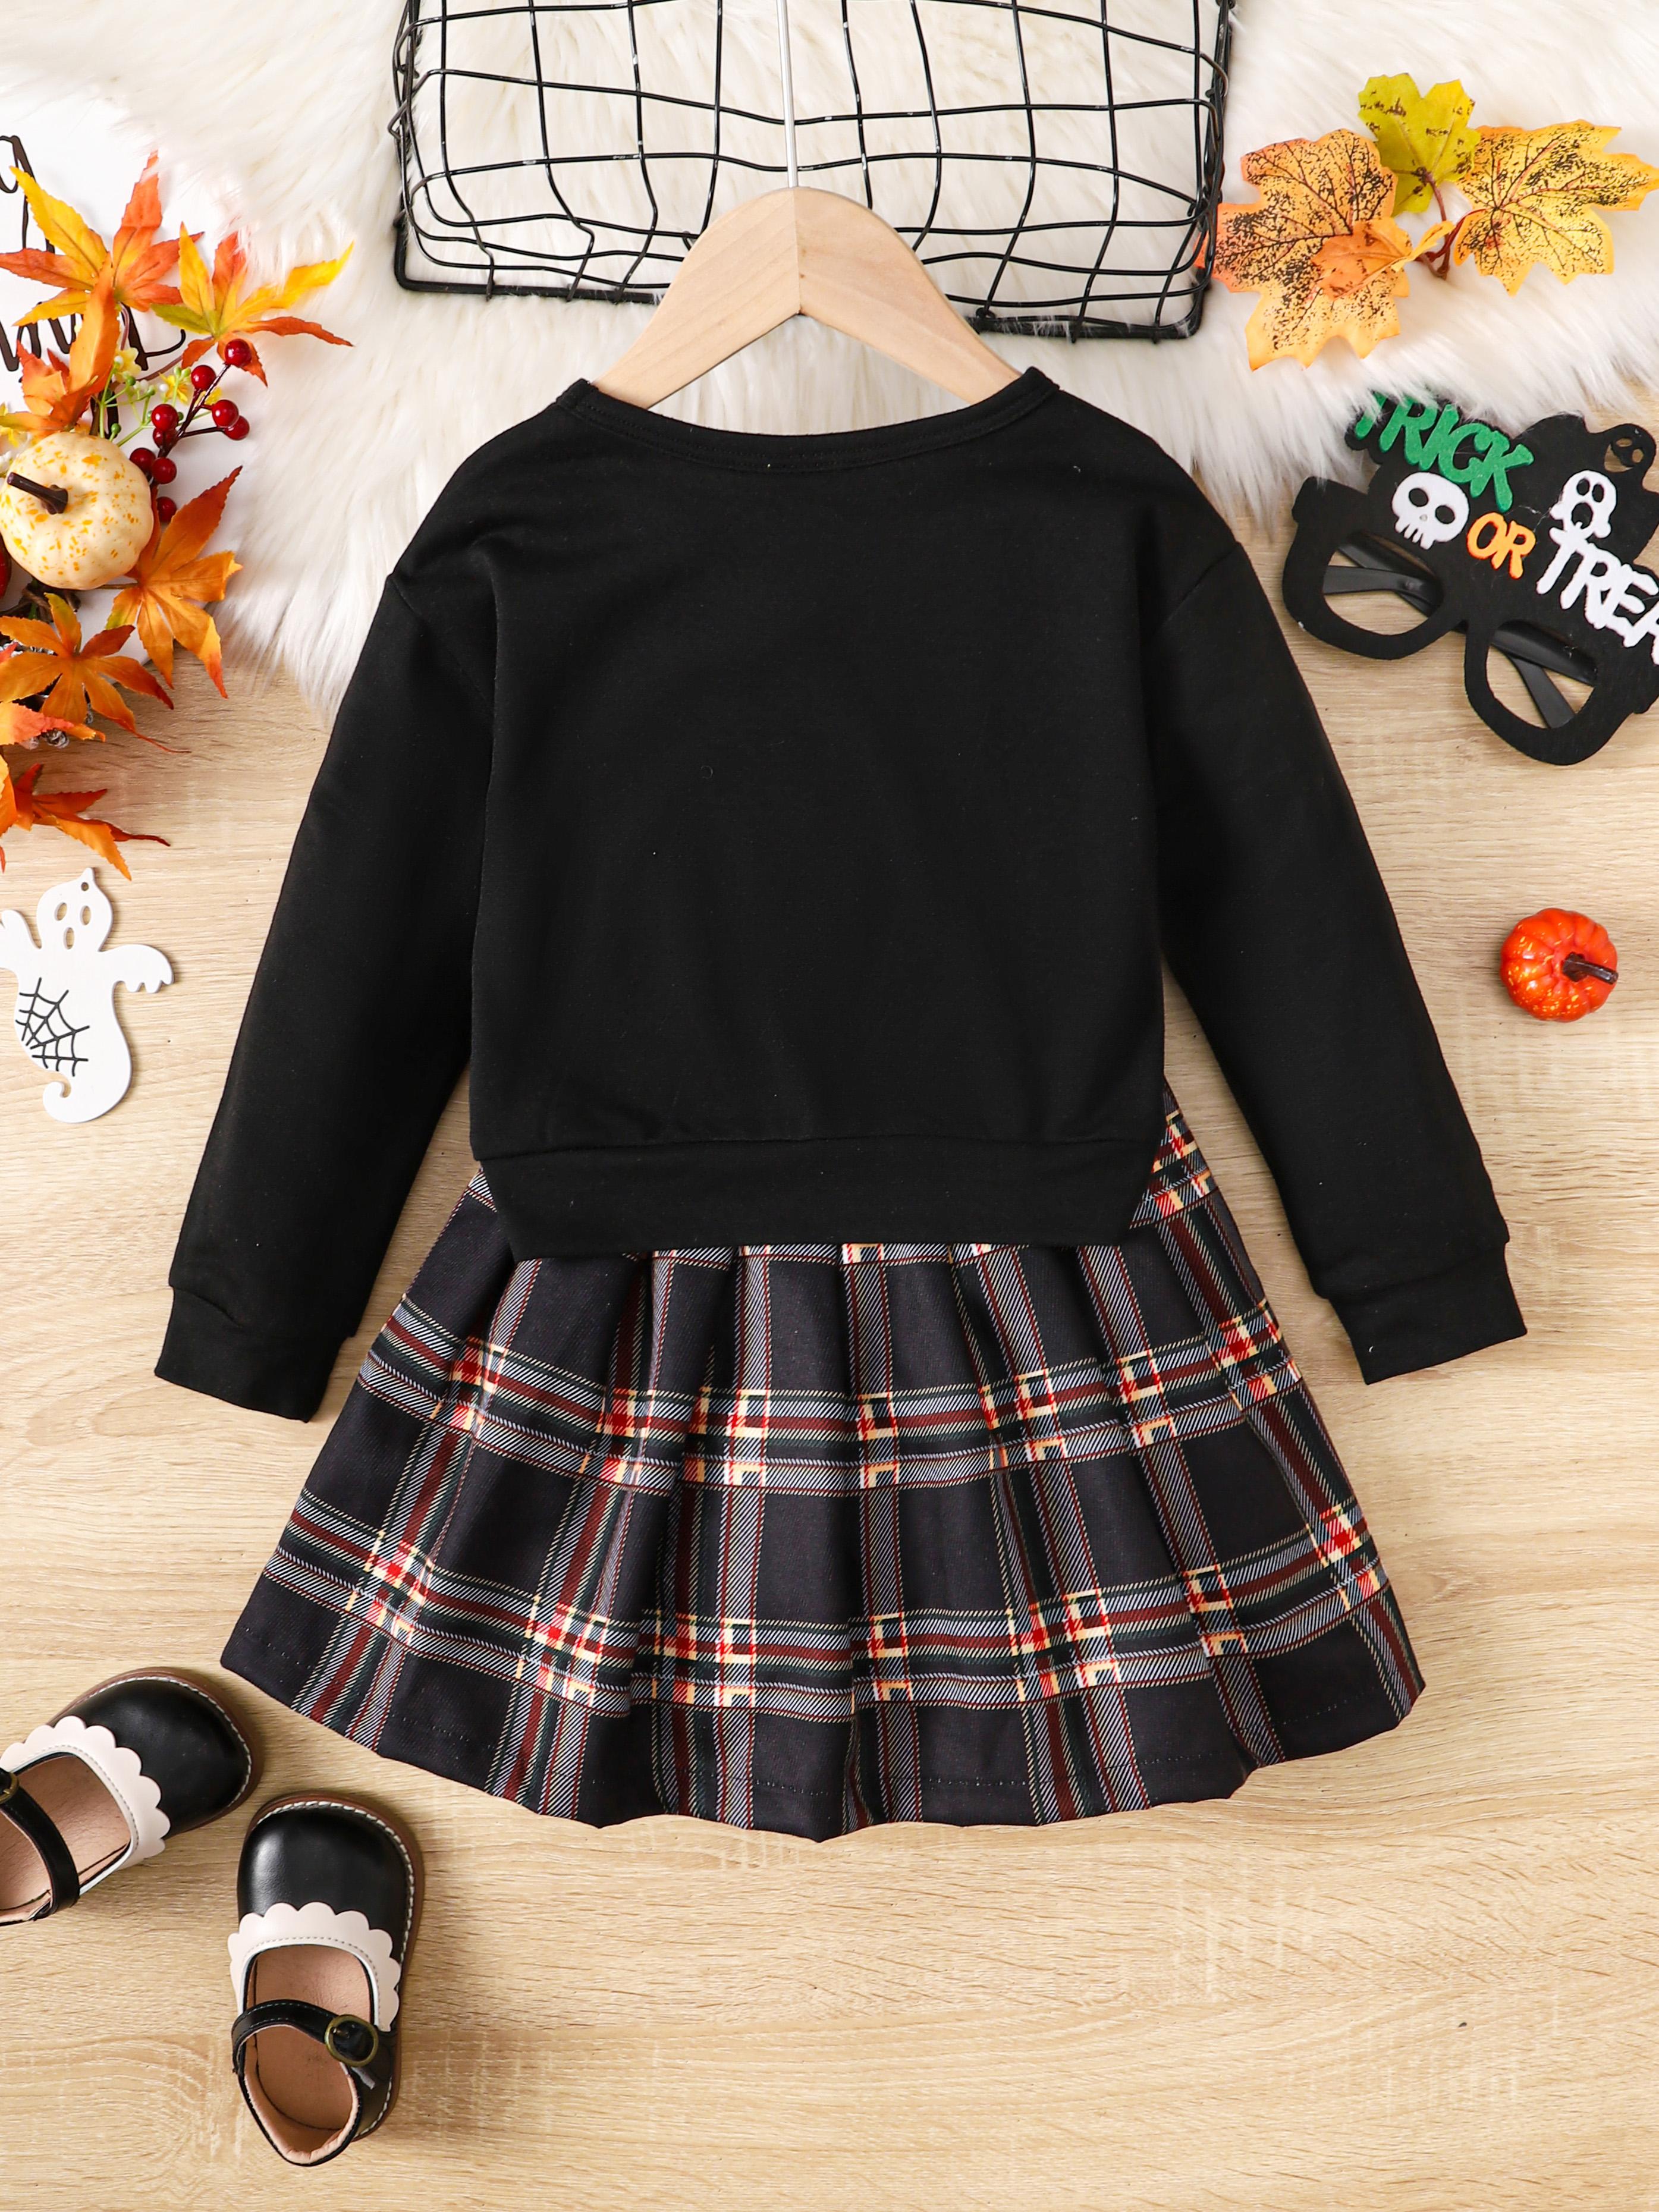 3-8Y Ready Stock Kids Girls Halloween Outfits Skirt Sets "TRICK OR TREAT" Letter Graphics Candy Print Long Sleeve Tops Plaid Pleated Skirts 2Pcs Clothing Black Catpapa 462307158